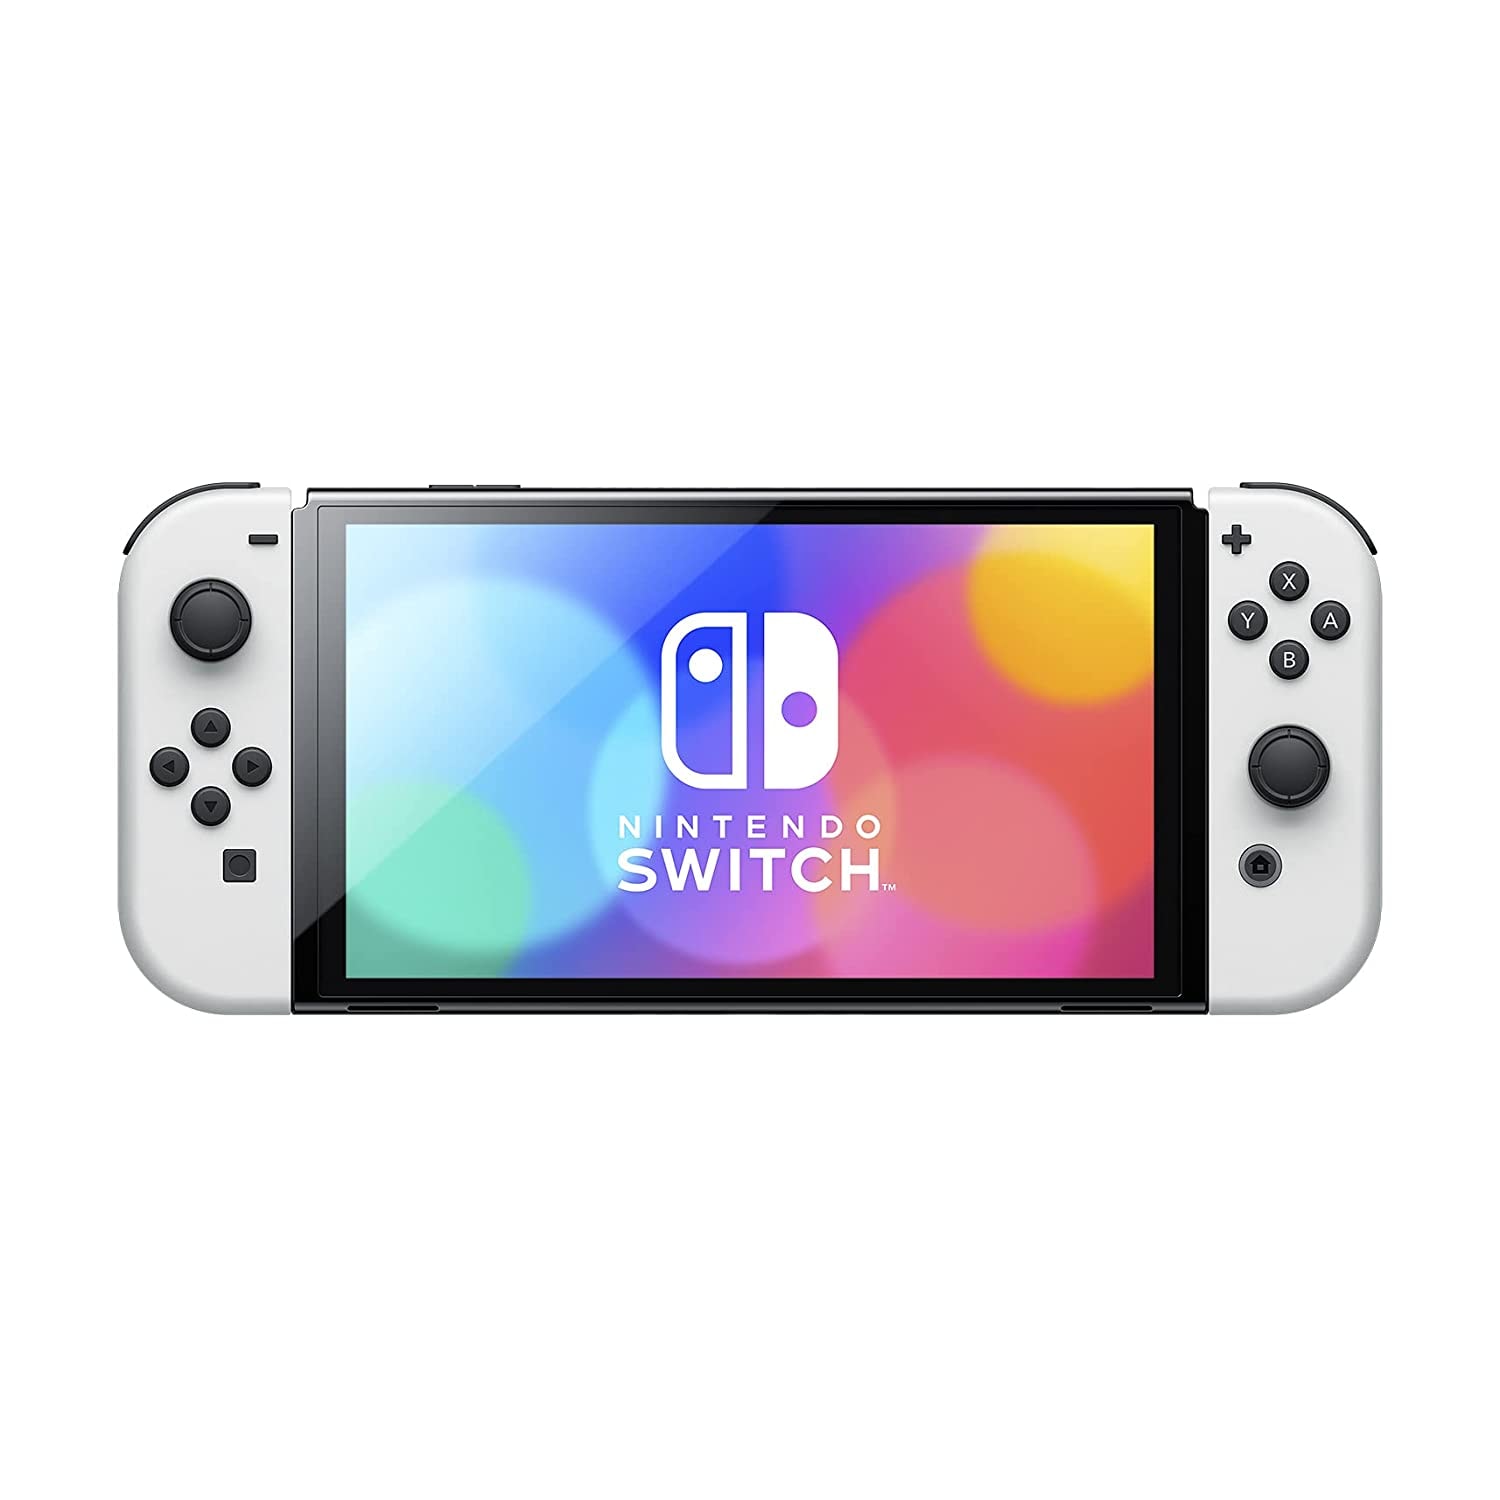 Buy Nintendo Switch OLED Console Pre-Order - White - Cheap - G2A.COM!